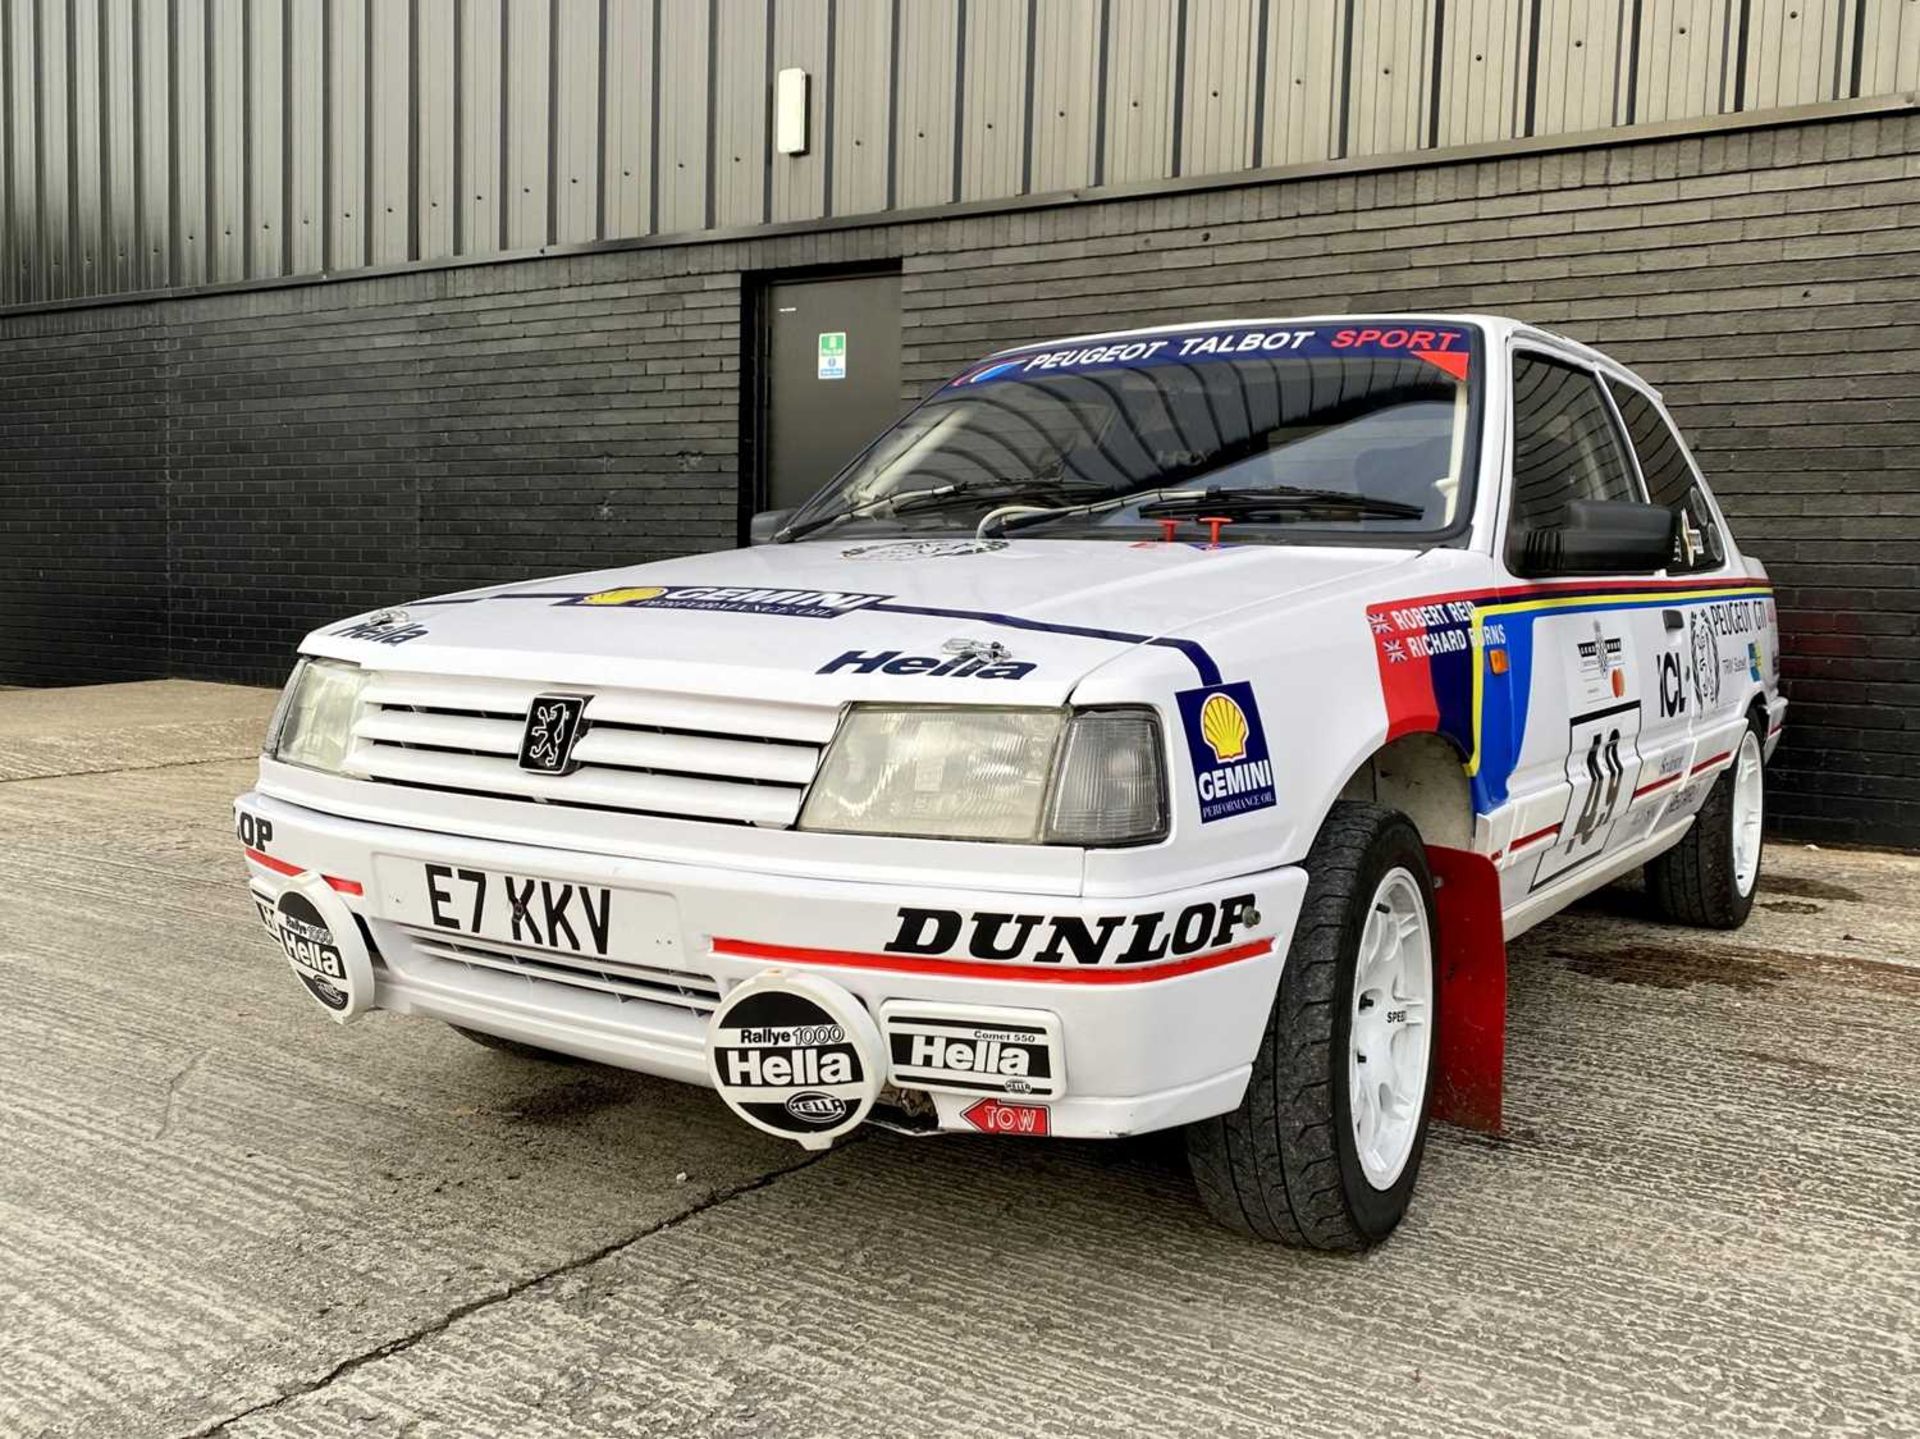 1987 Peugeot 309 GTi Group N Rally Car FIA paperwork and a previous entrant at the Goodwood Festival - Image 2 of 50